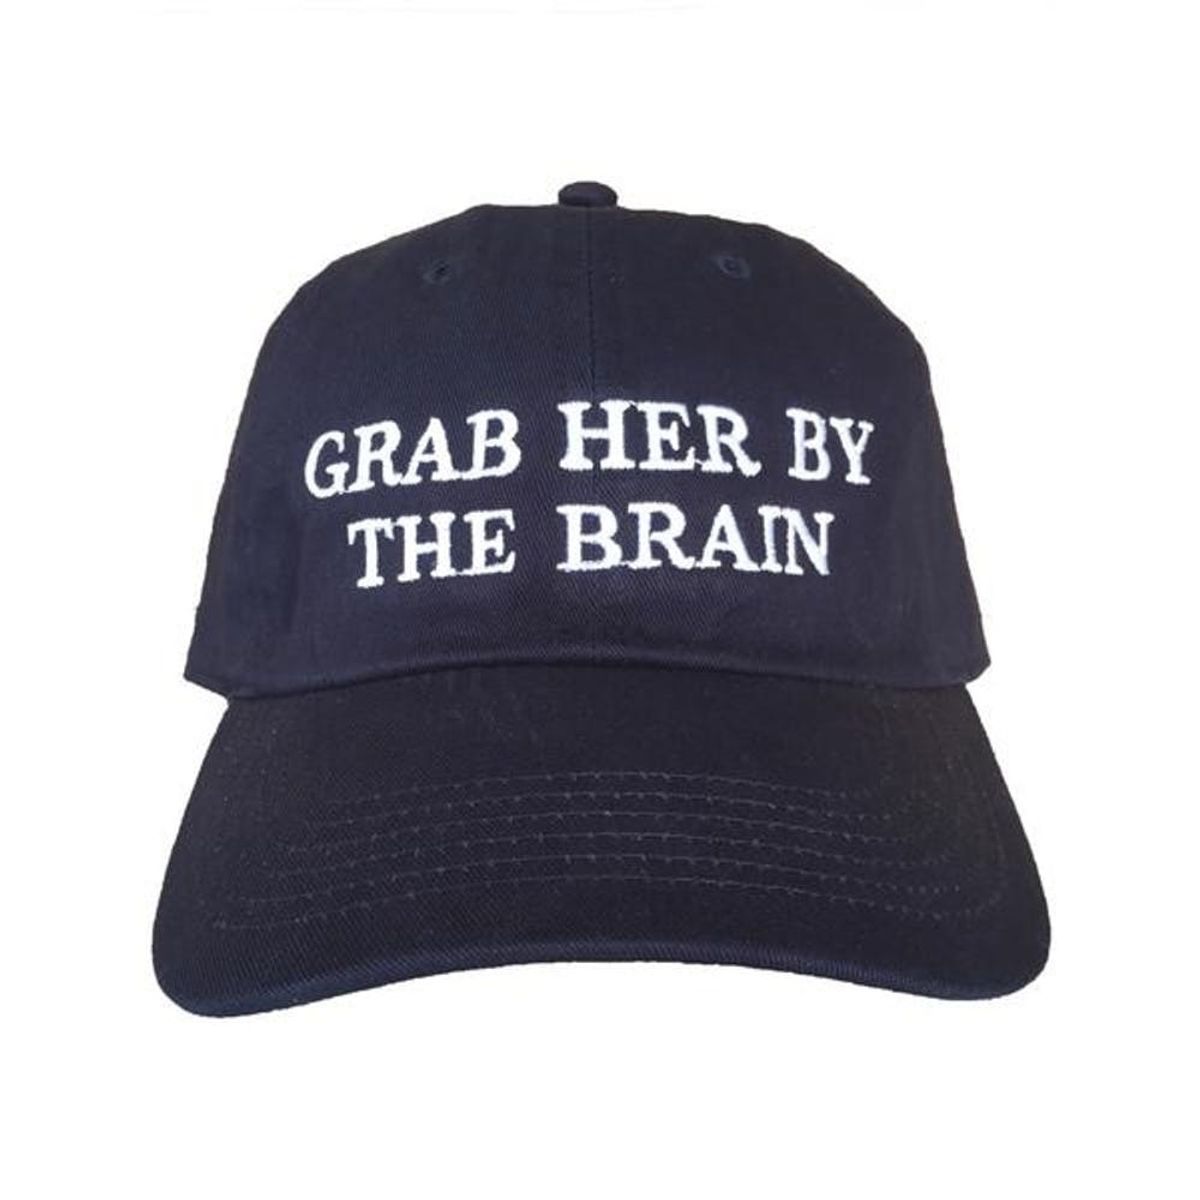 Peeps Are Extremely Upset About the “Grab Her by the Brain” Campaign